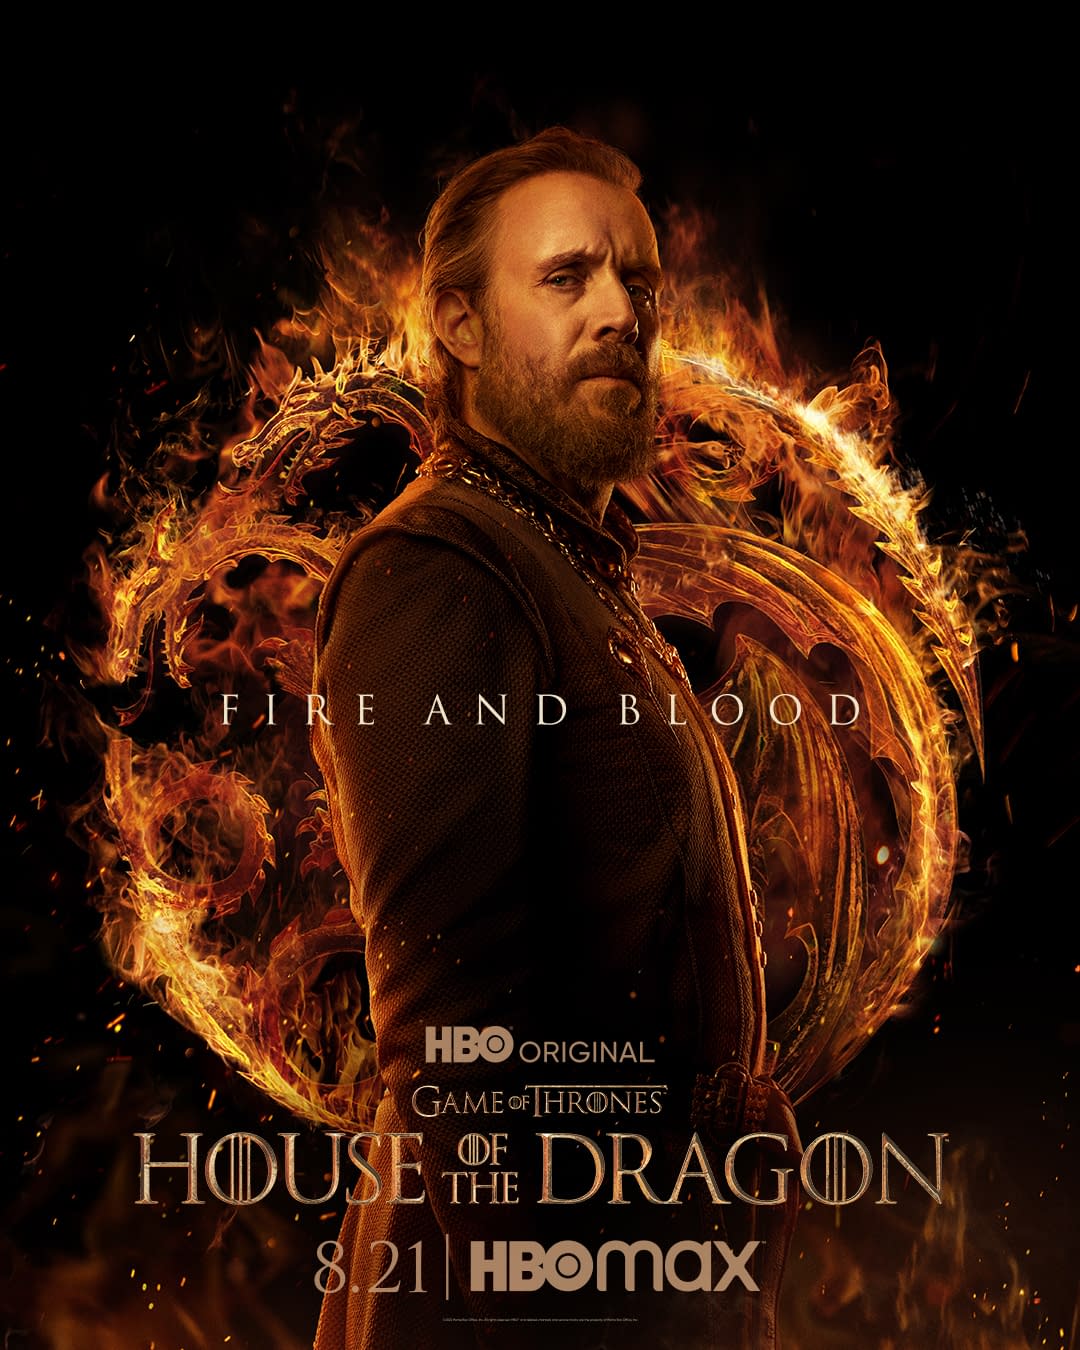 House of the Dragon season 2 promises 'fire and blood' with first teasers